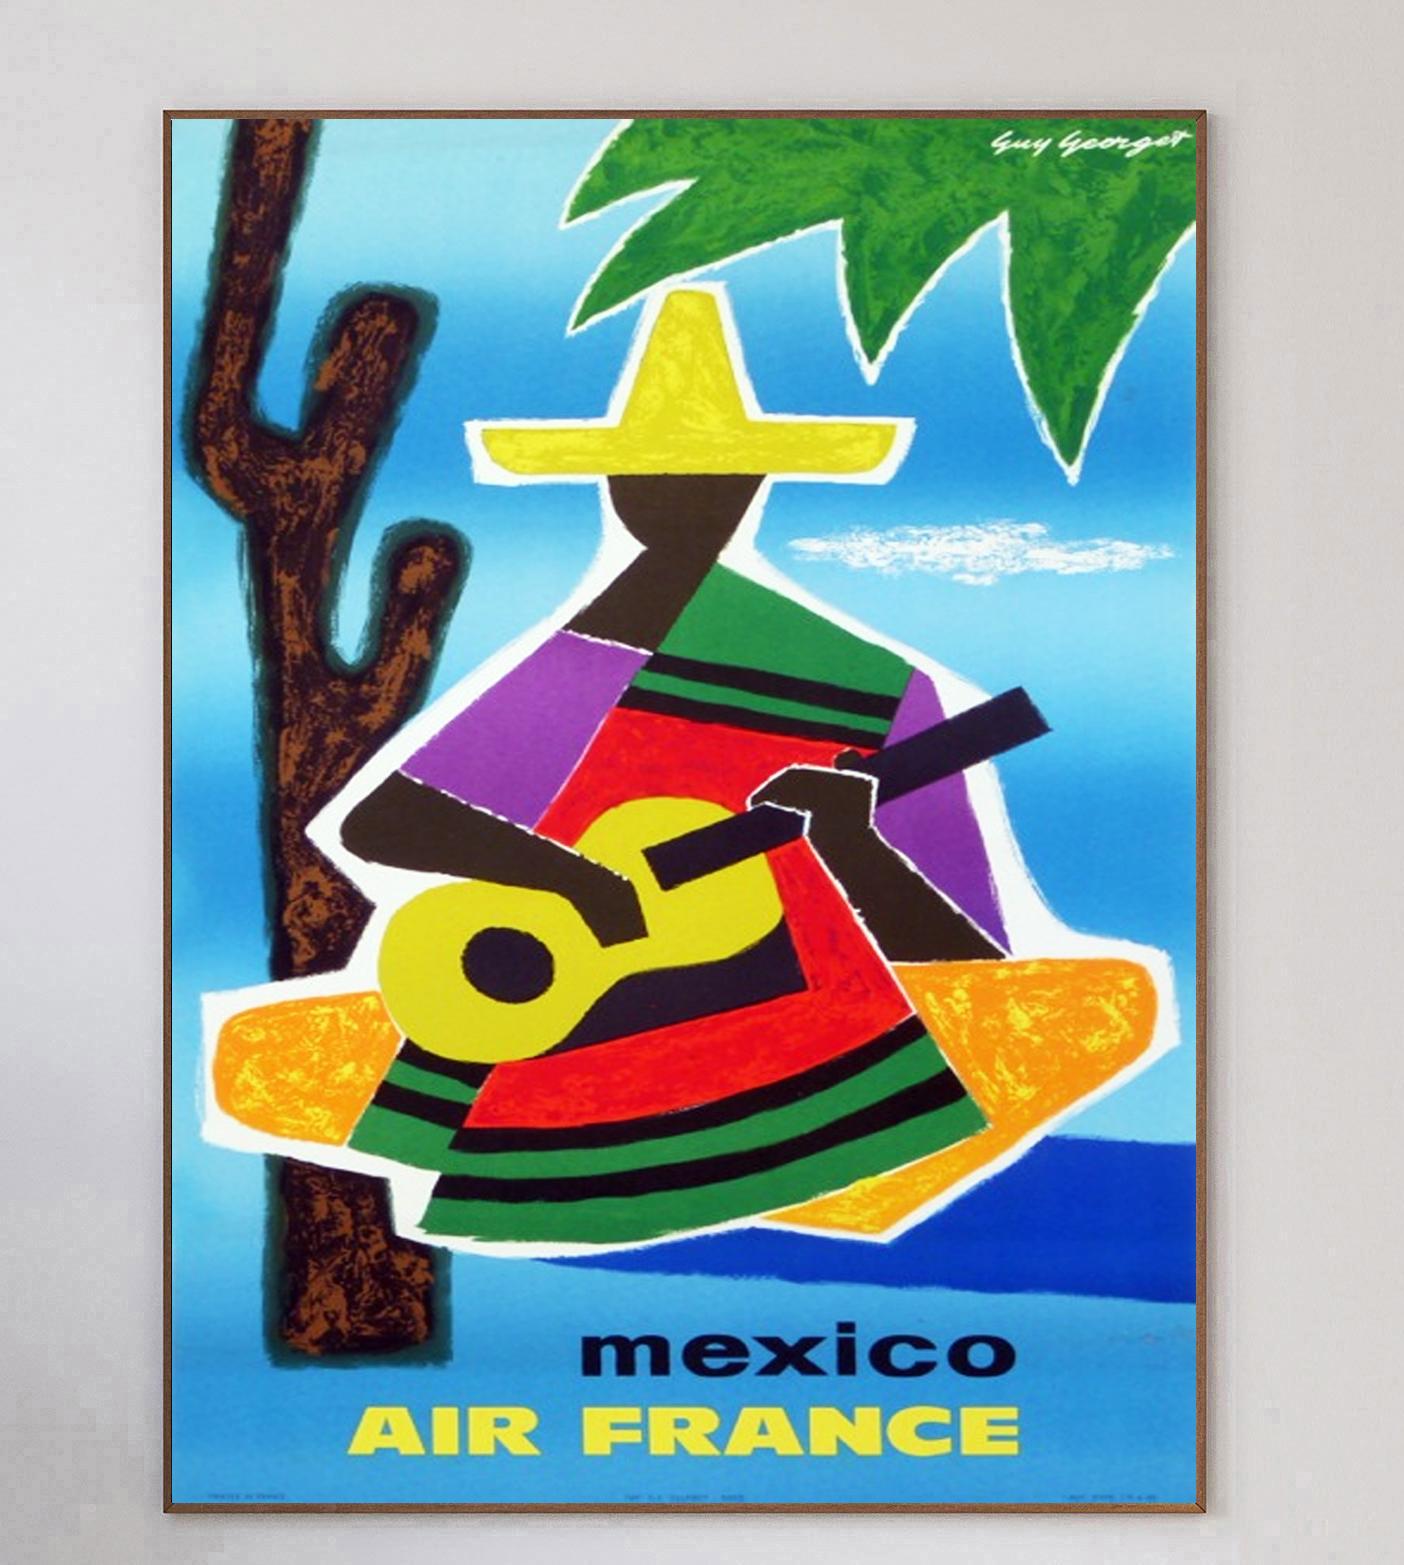 With fabulous artwork from French artist Guy Georget who worked on many Air France posters of the era, this poster promoting the airlines routes to Mexico was created in 1962. Air France was created in 1933 after a merger of multiple French airlines